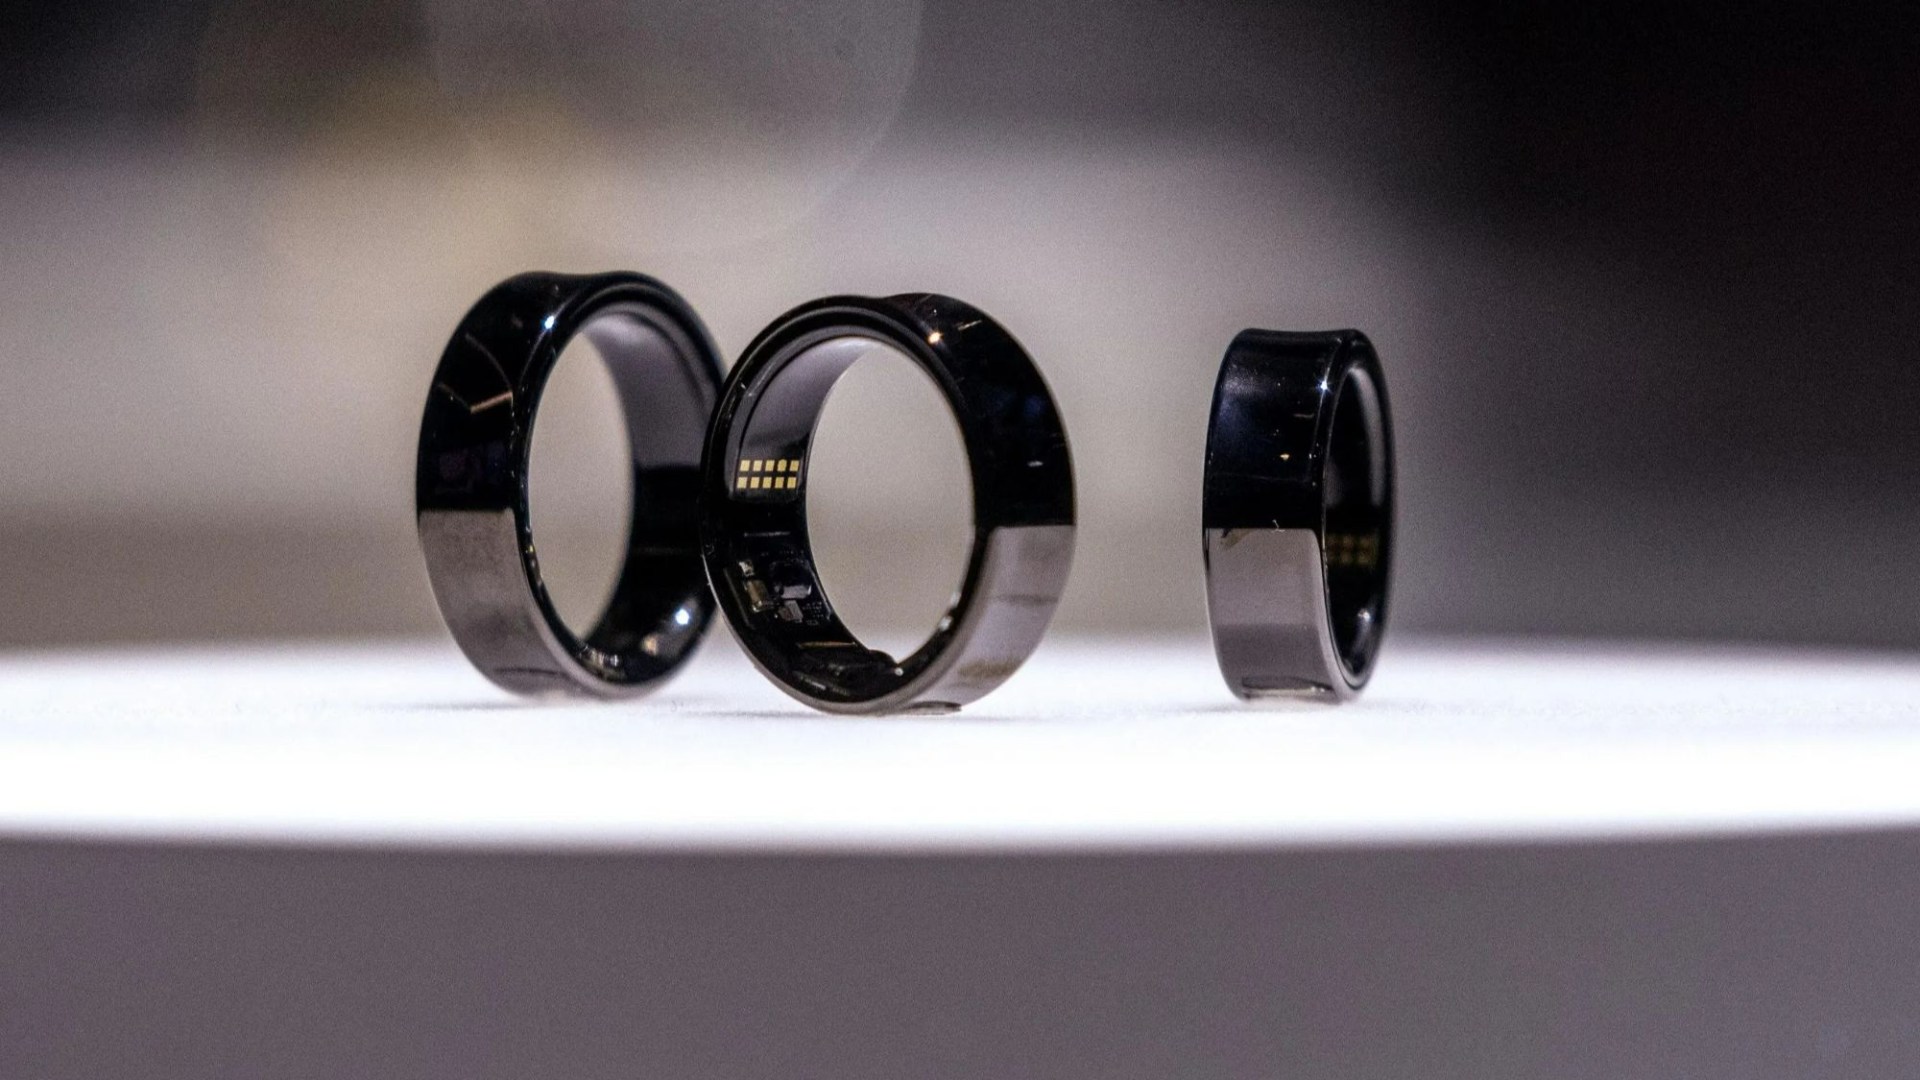 Samsung smart ring features leak ahead of rumoured Galaxy launch next week including stress tracking and snore detection [Video]